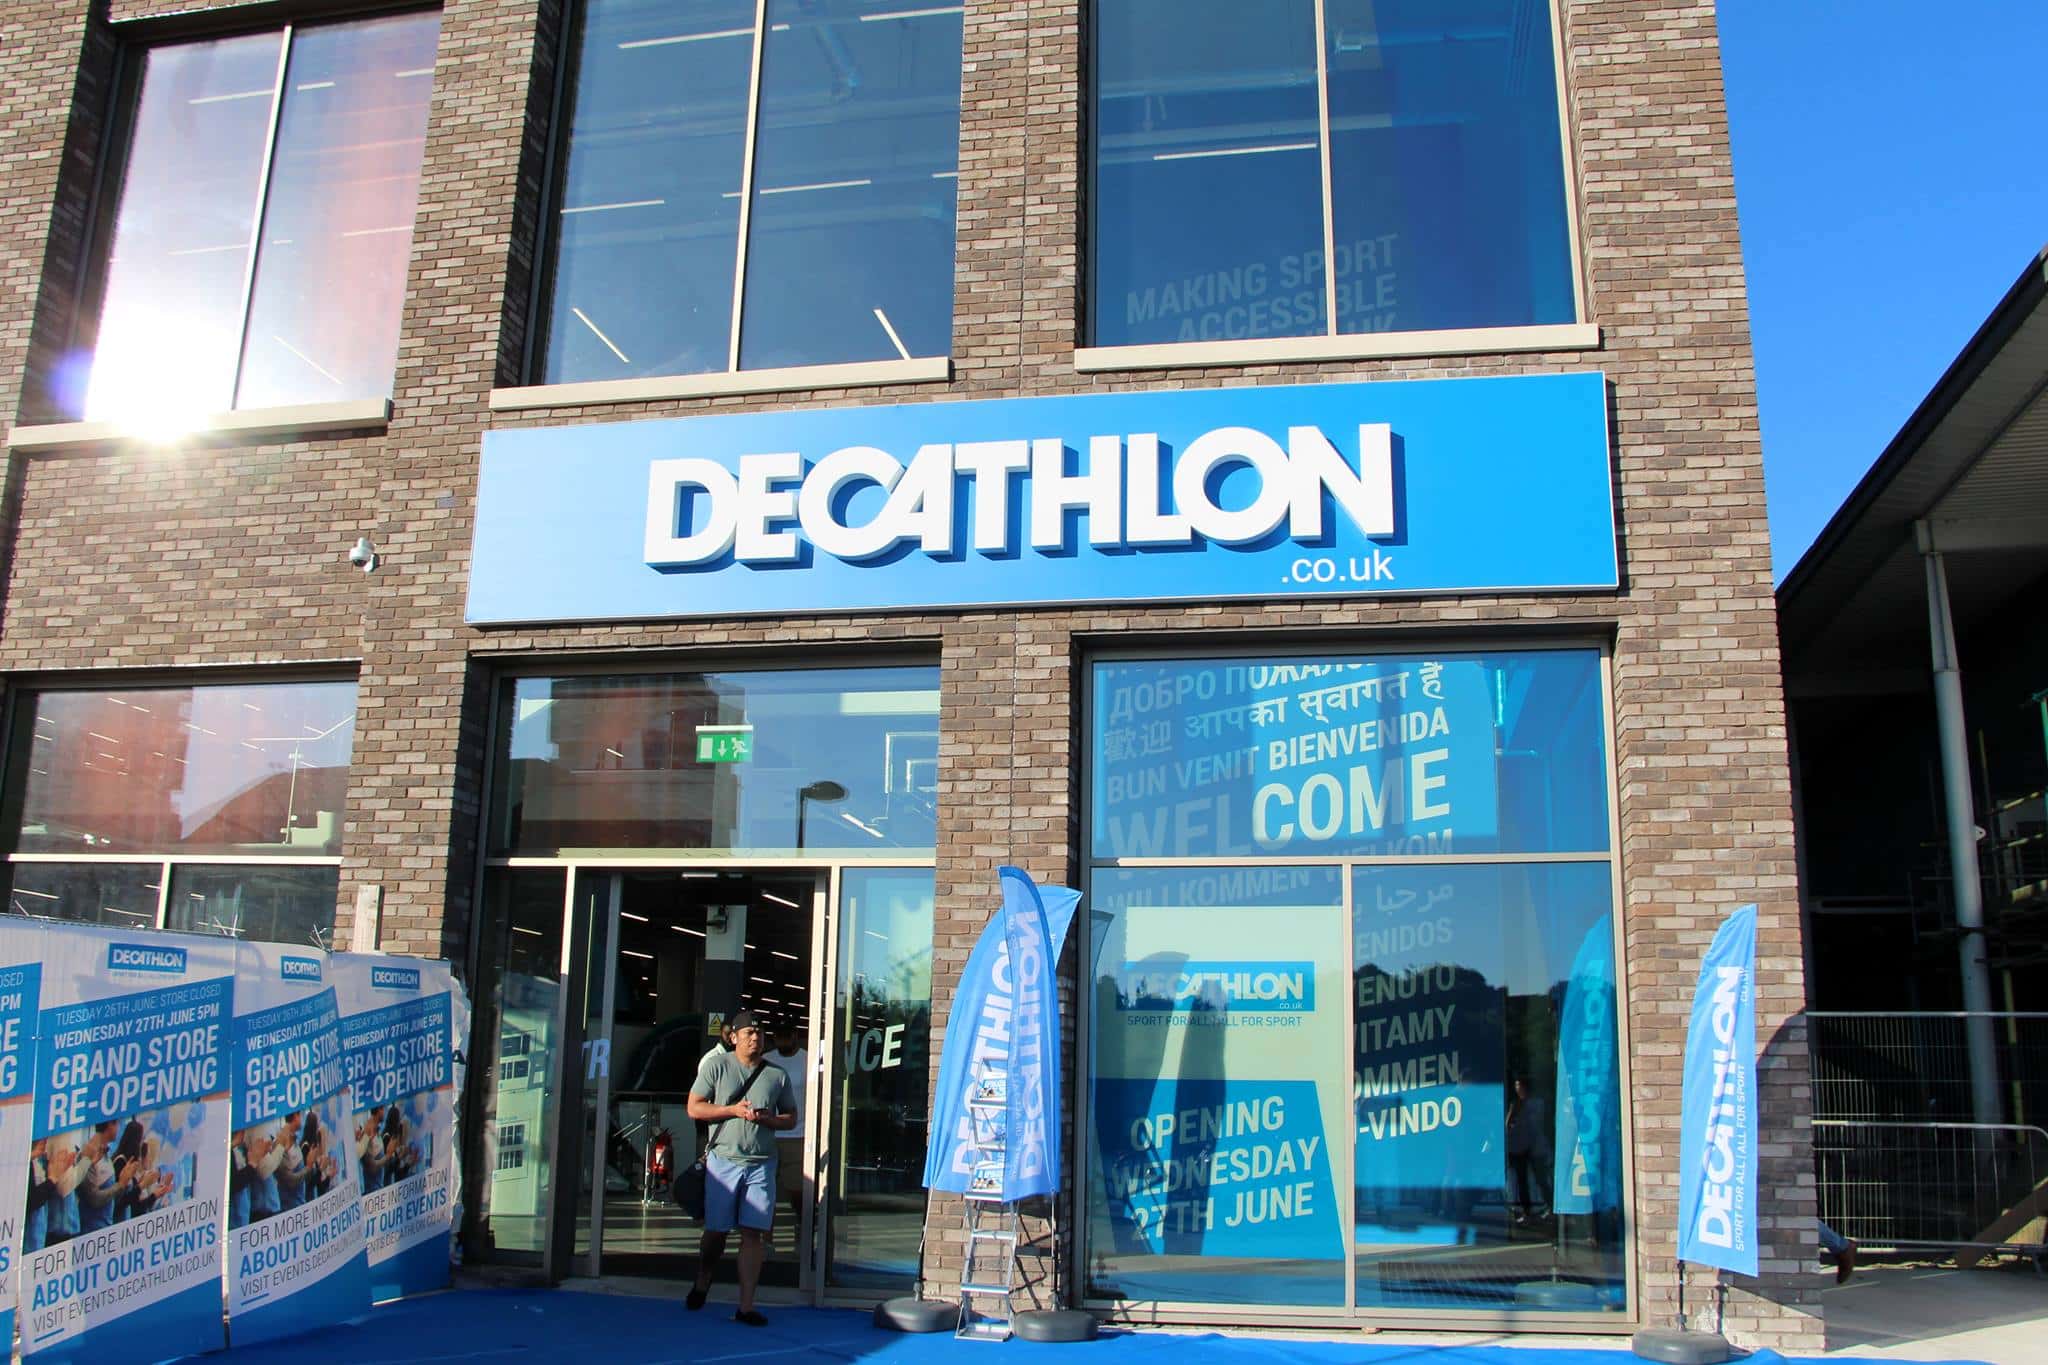 View of the entrance to a Décathlon store in UK